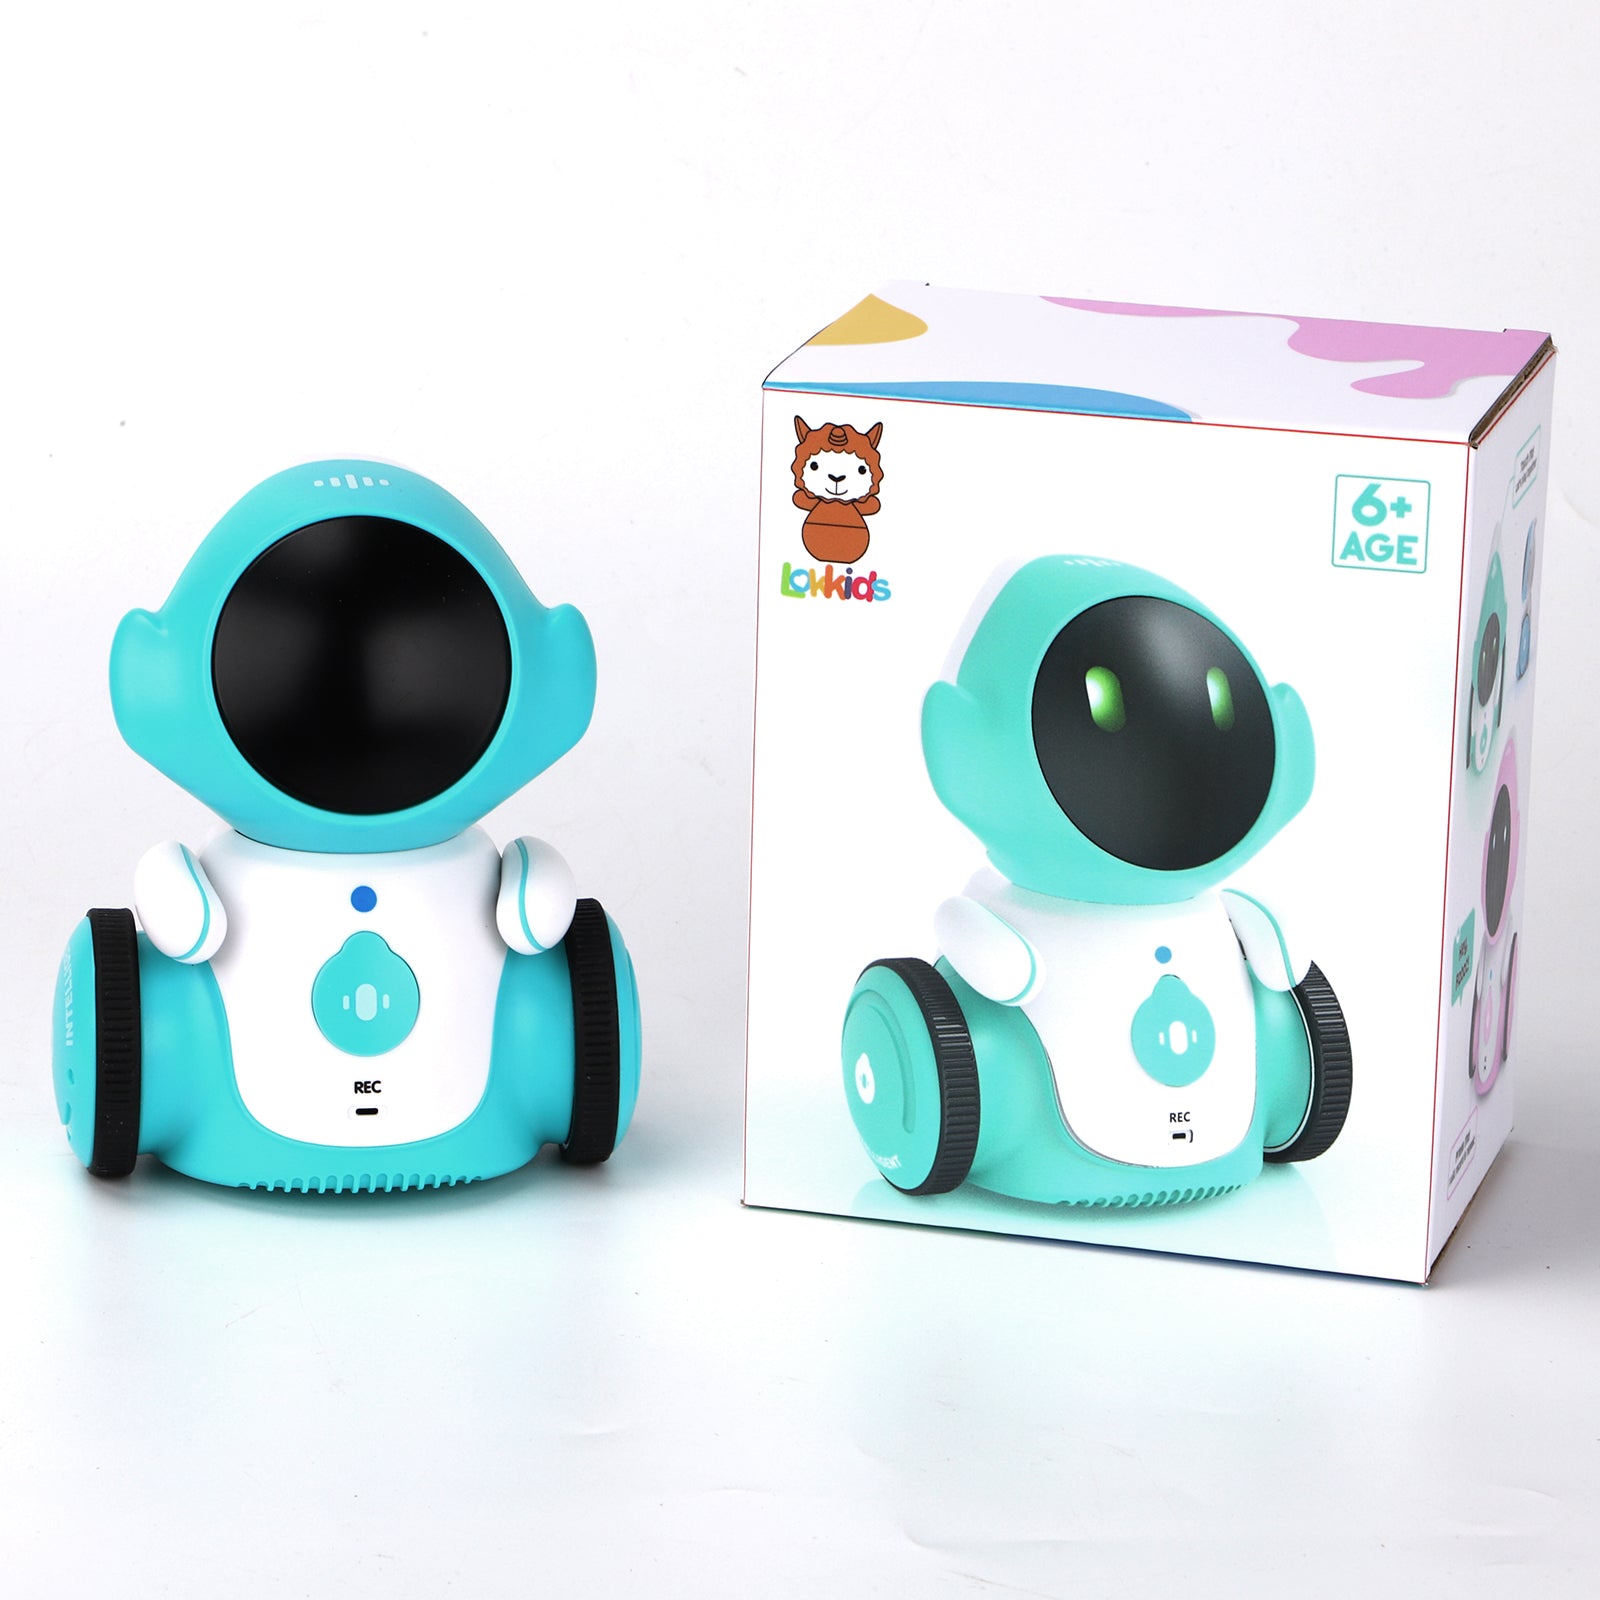 Lokkids Rechargeable Intelligent Robot Toys | Robot for Kids | Ideal Gift for Boys & Girls